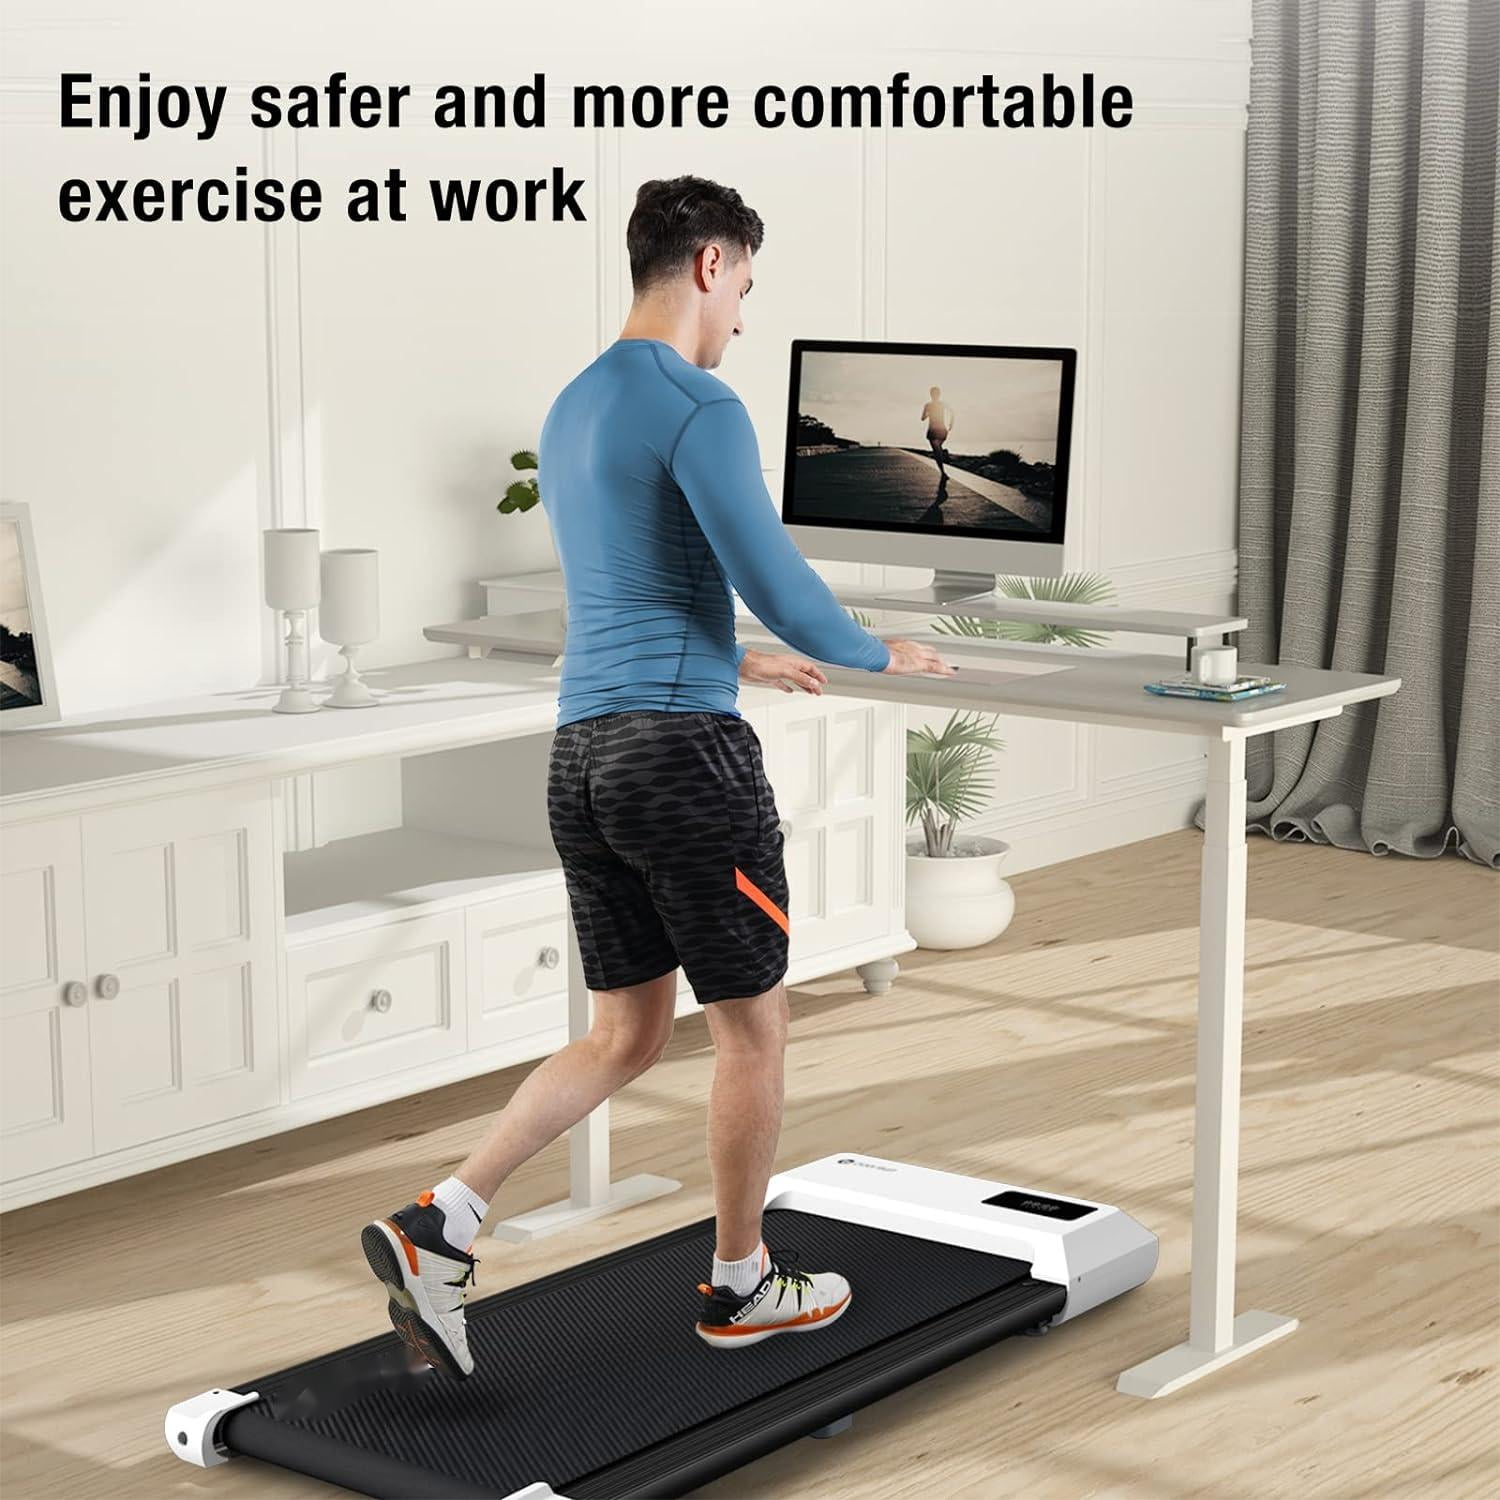 SupeRun Under Desk Treadmill, 35.5*15.5 Walking Area Walking Pad for Home/Office, Portable Walking Treadmill 2.5HP, 2 in 1 Electric Desk Treadmill with Remote Control and LED Display